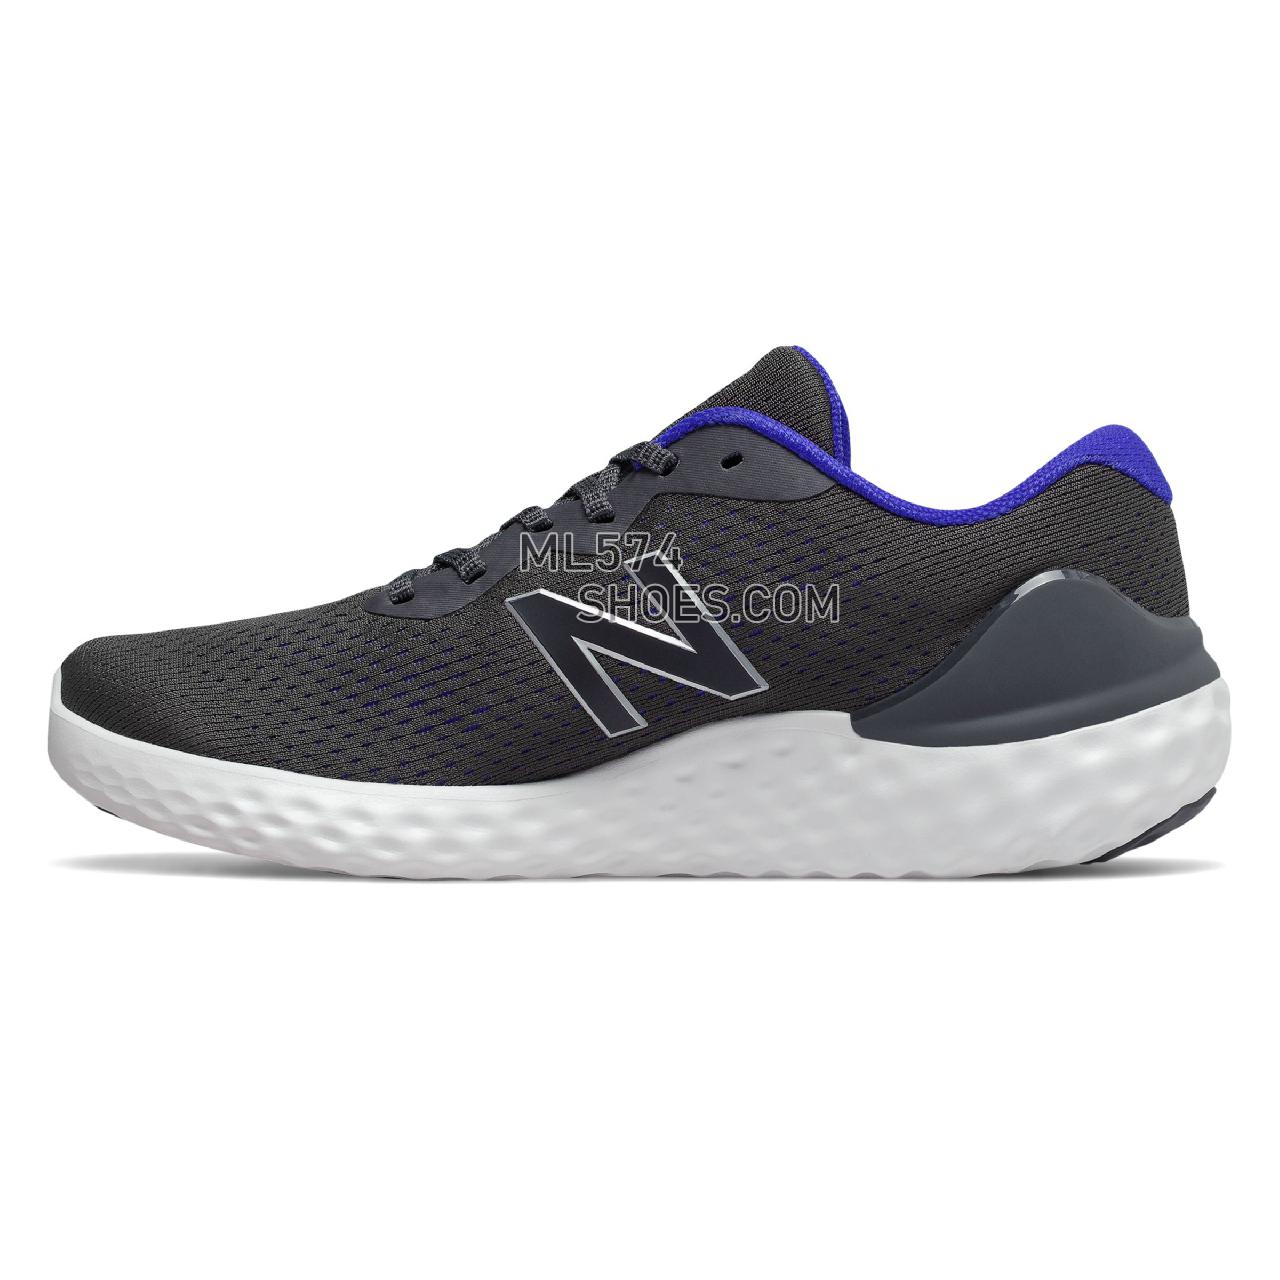 New Balance Fresh Foam 1365 - Men's Walking - Magnet with UV Blue and White - MW1365LM